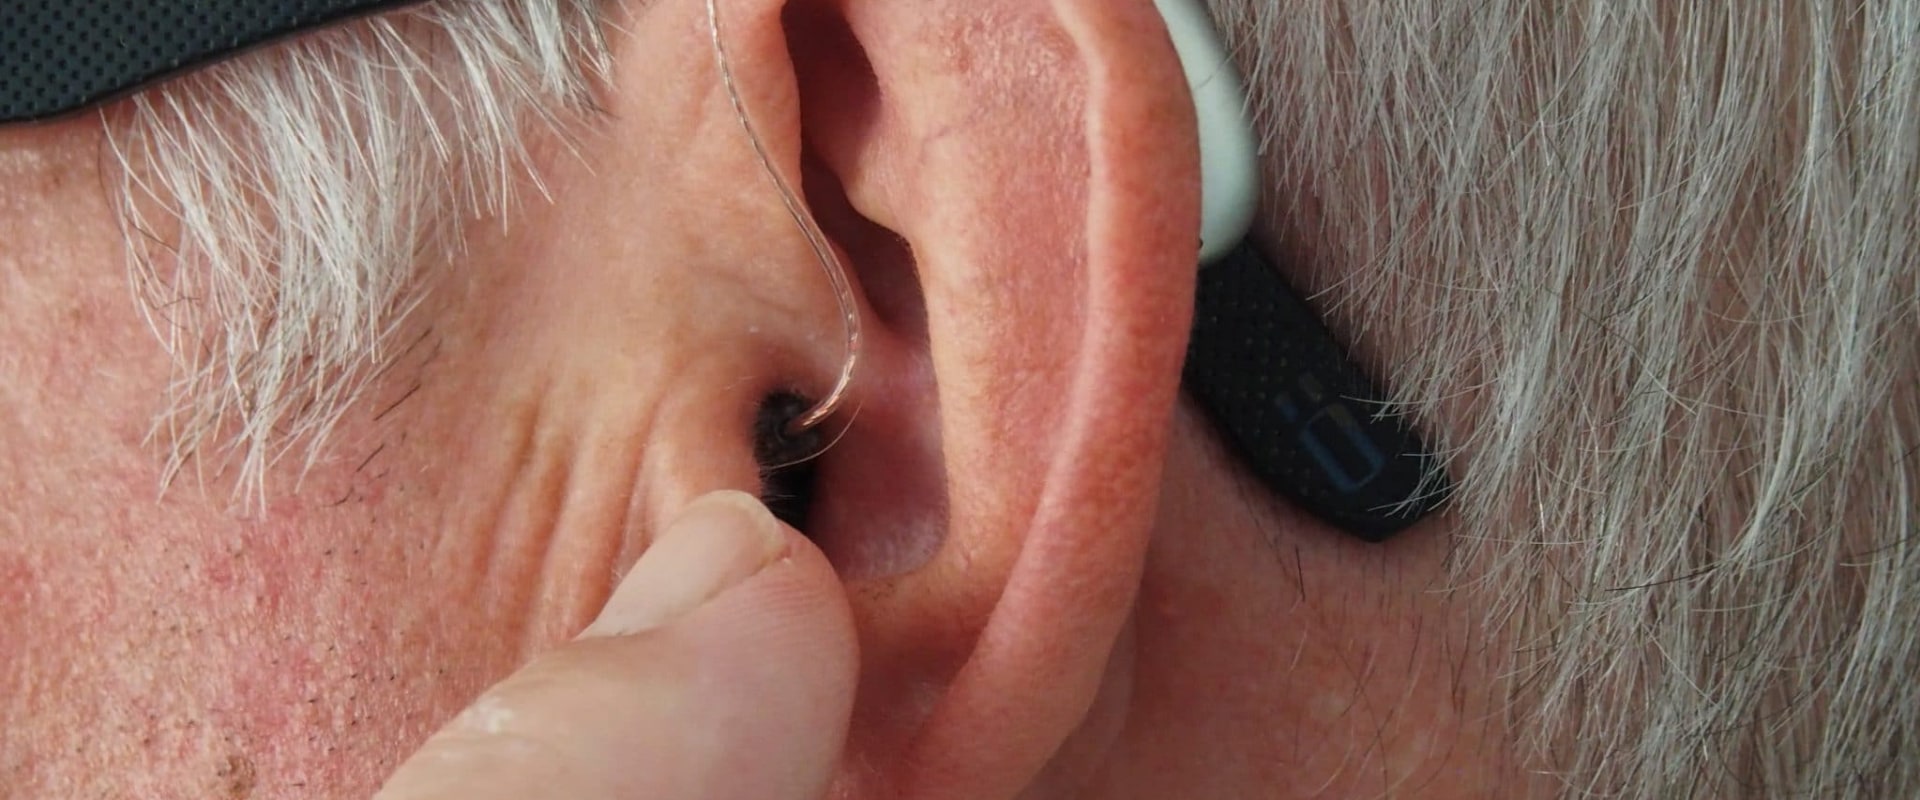 Does your hearing get worse if you don't wear hearing aid?